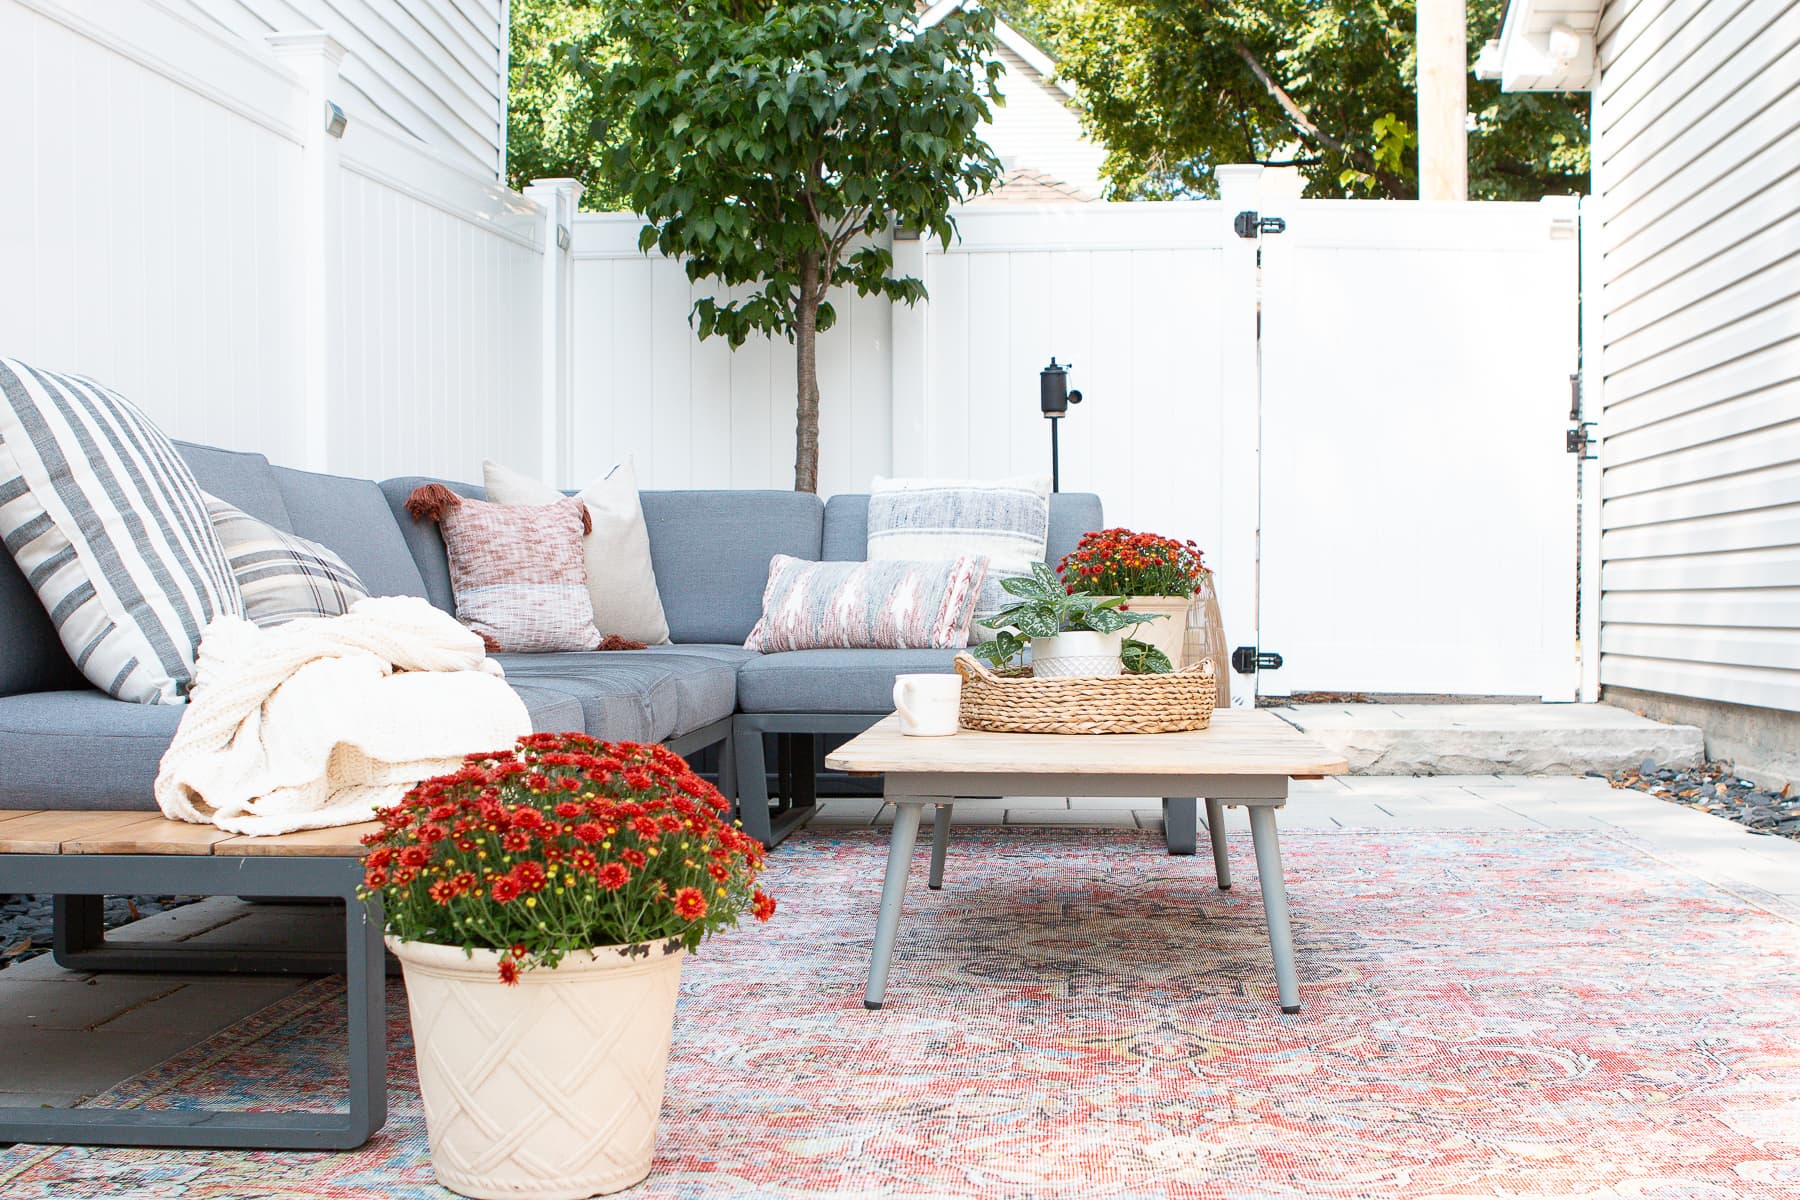 Adding some color to our backyard with an outdoor rug from Lowe's